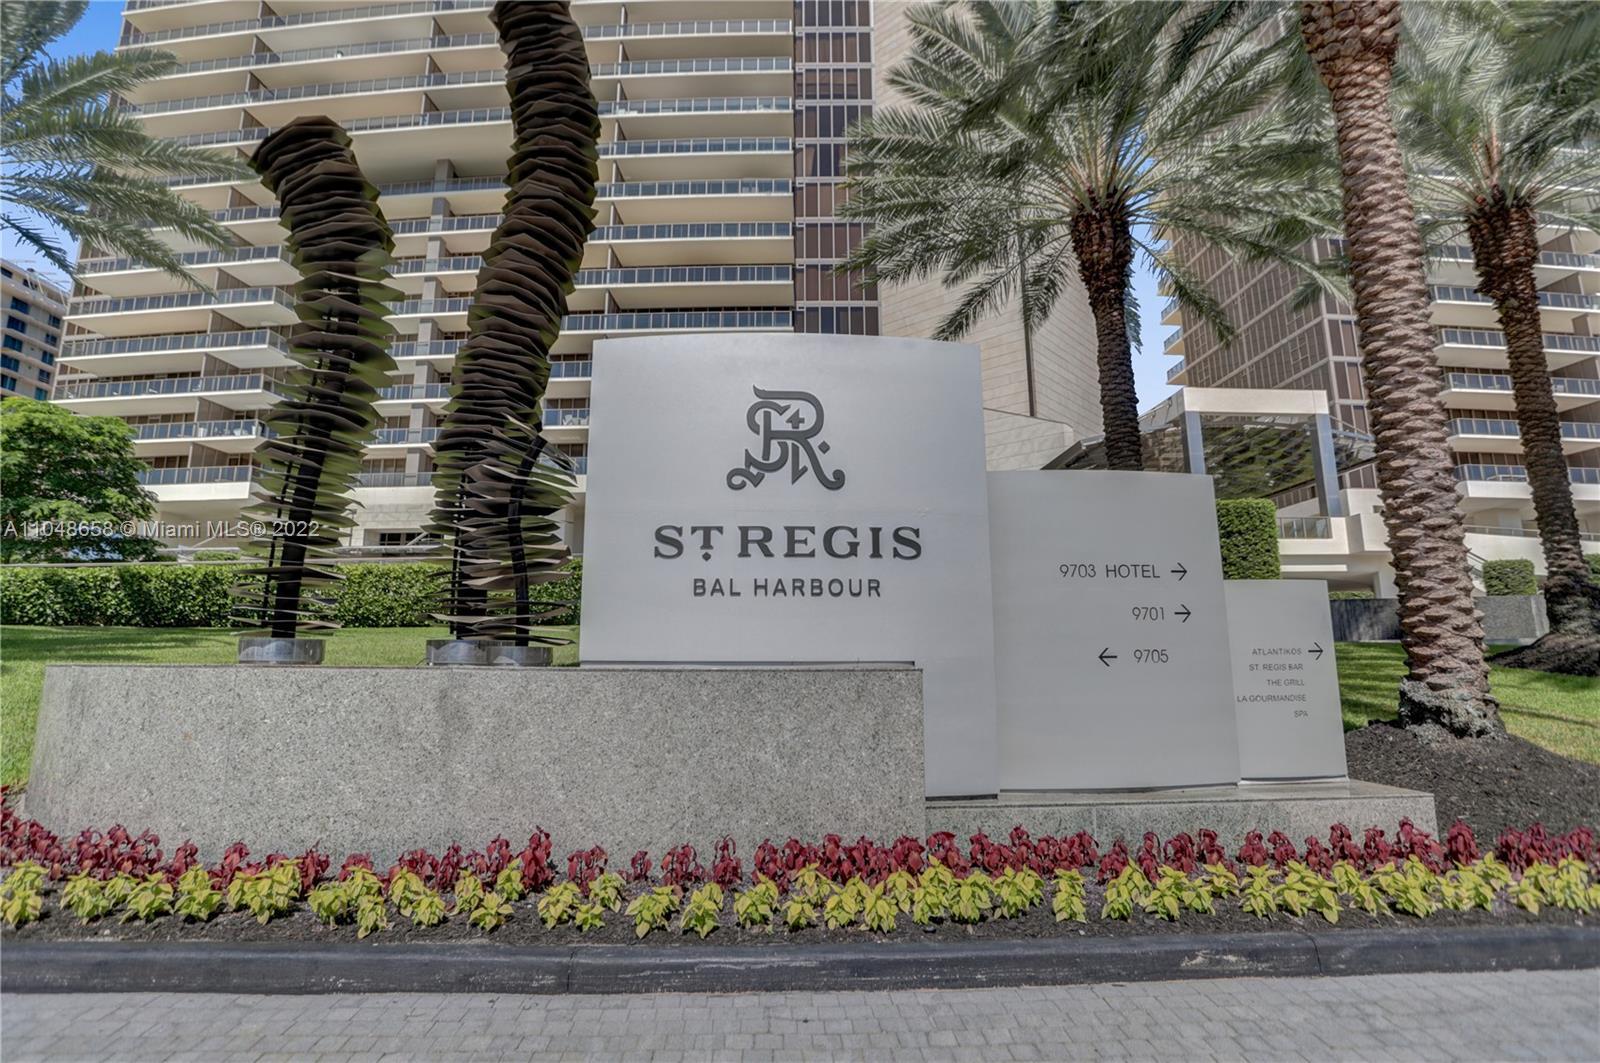 St. Regis 705 North Tower, luxurious beachfront living with great view of the bay and city skyline. 